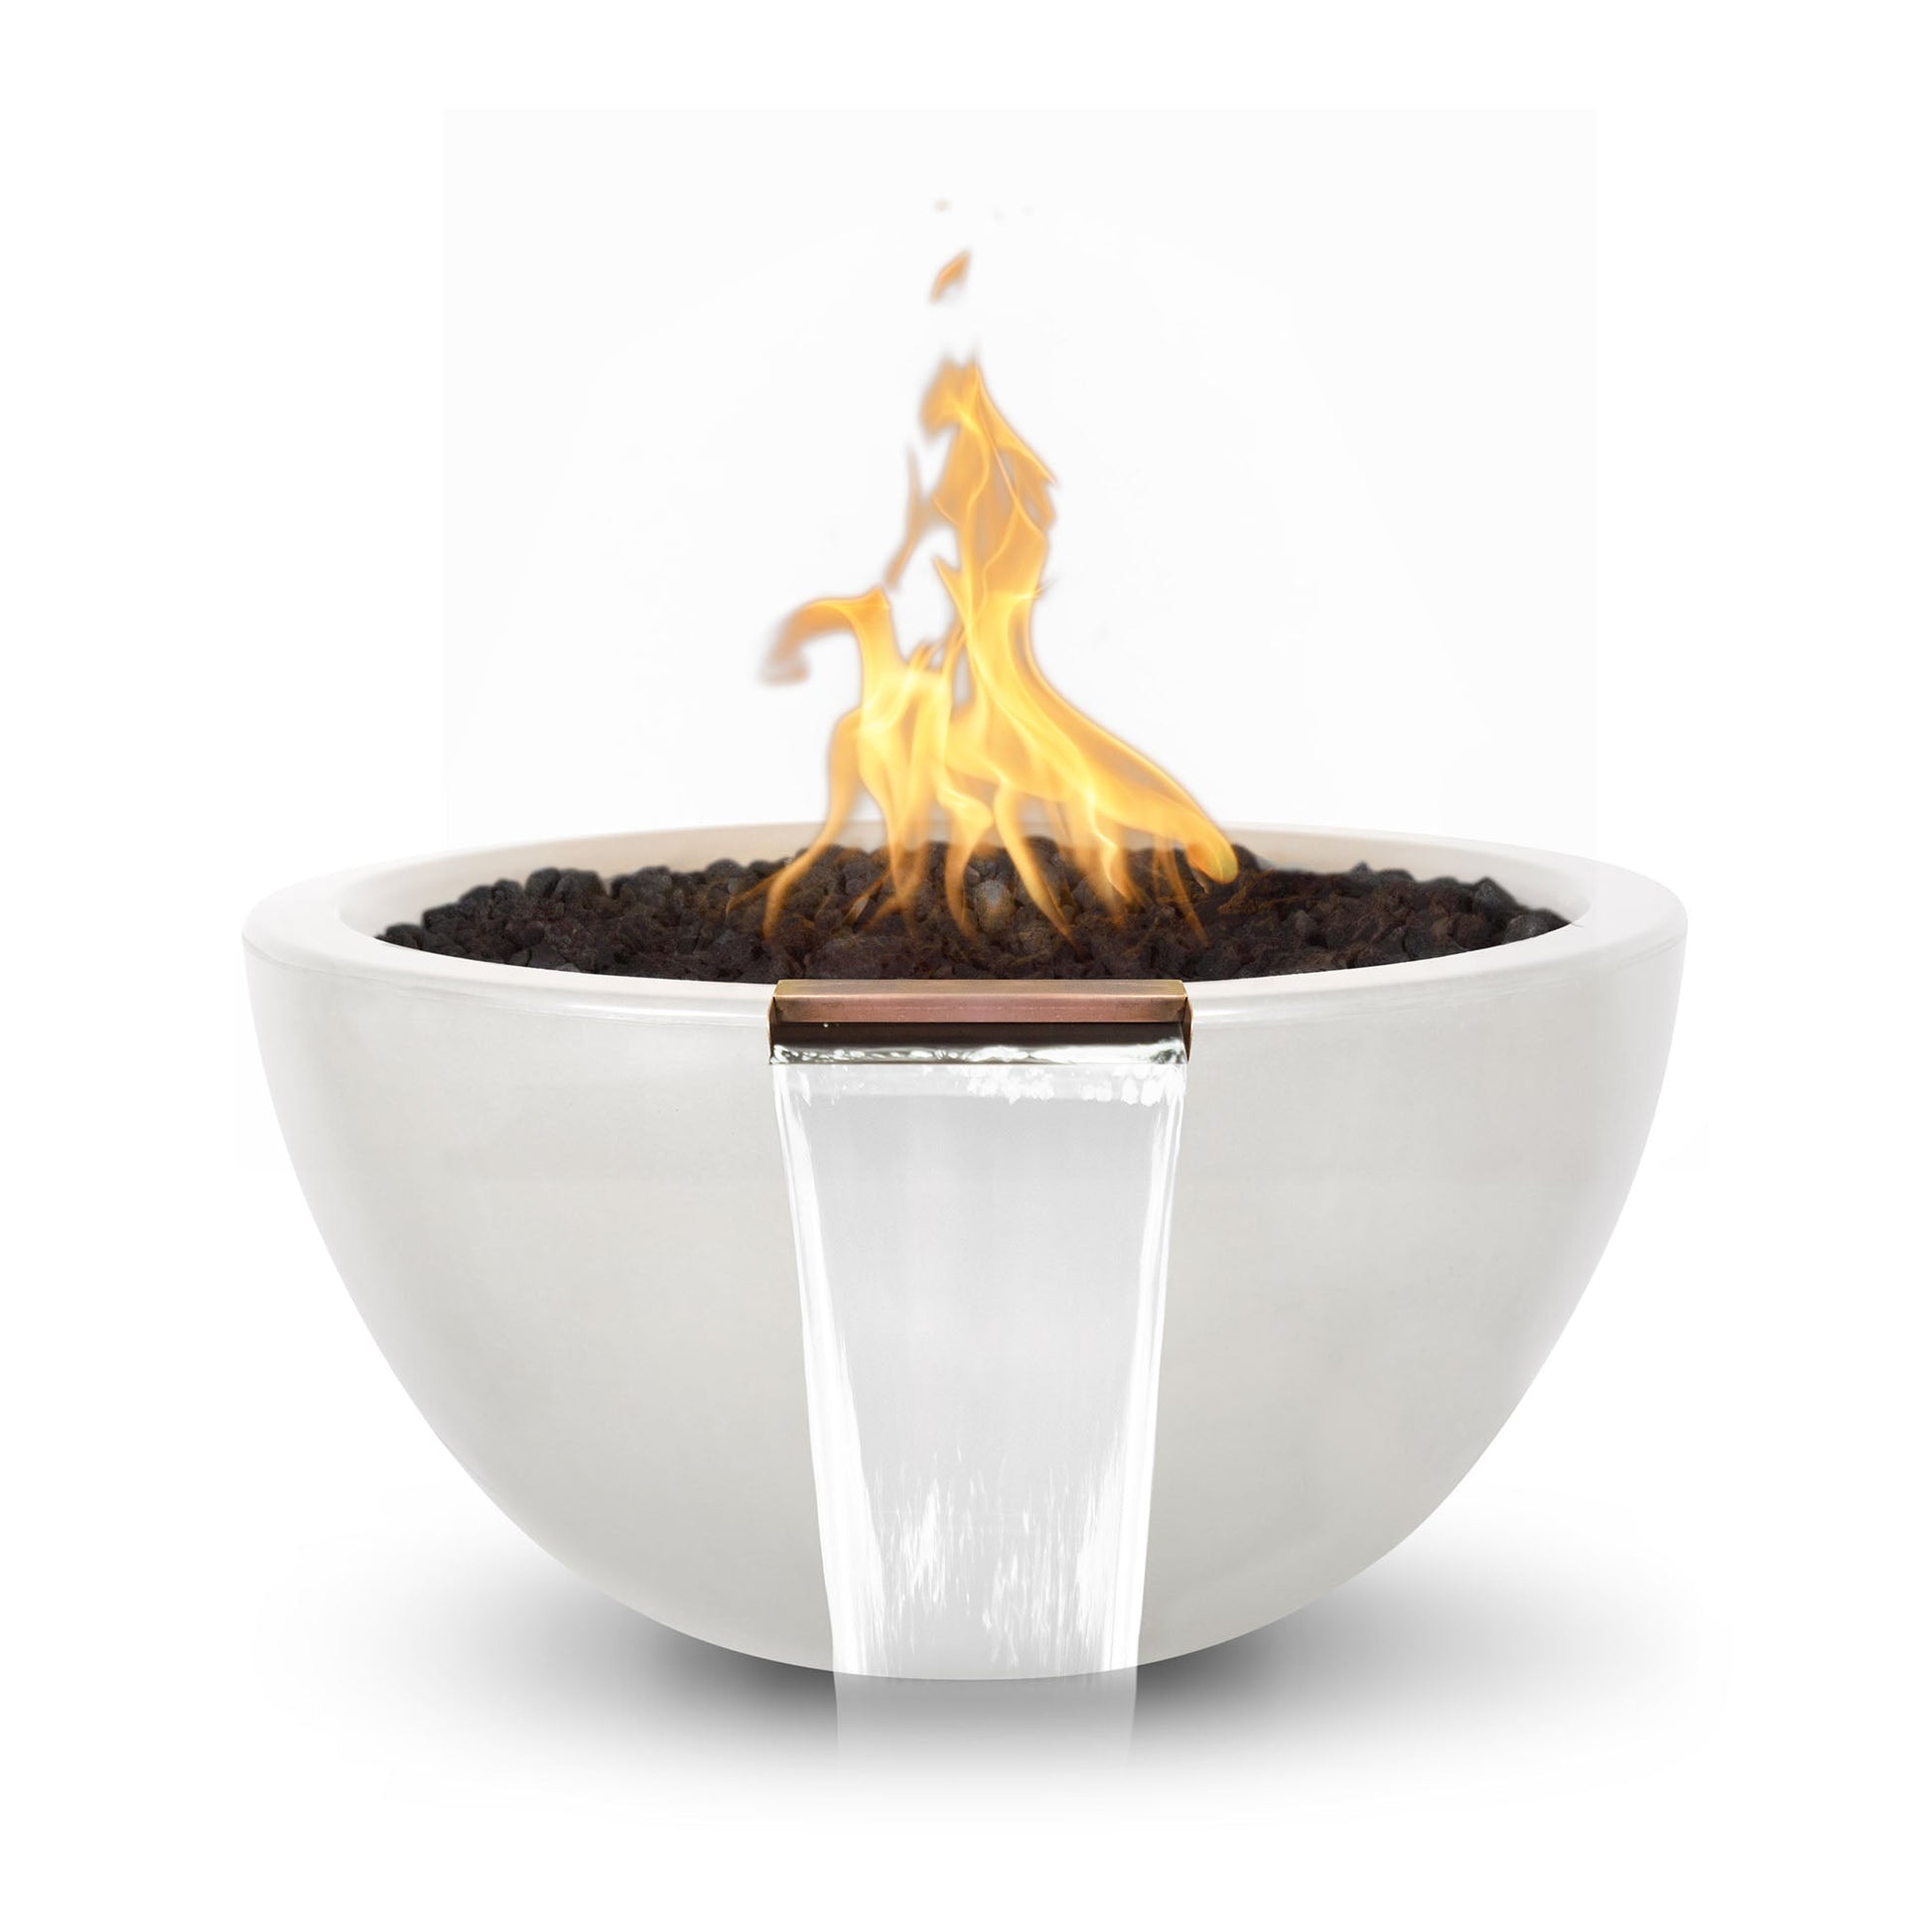 The Outdoor Plus Round Luna 30" Metallic Bronze GFRC Concrete Natural Gas Fire & Water Bowl with Match Lit with Flame Sense Ignition